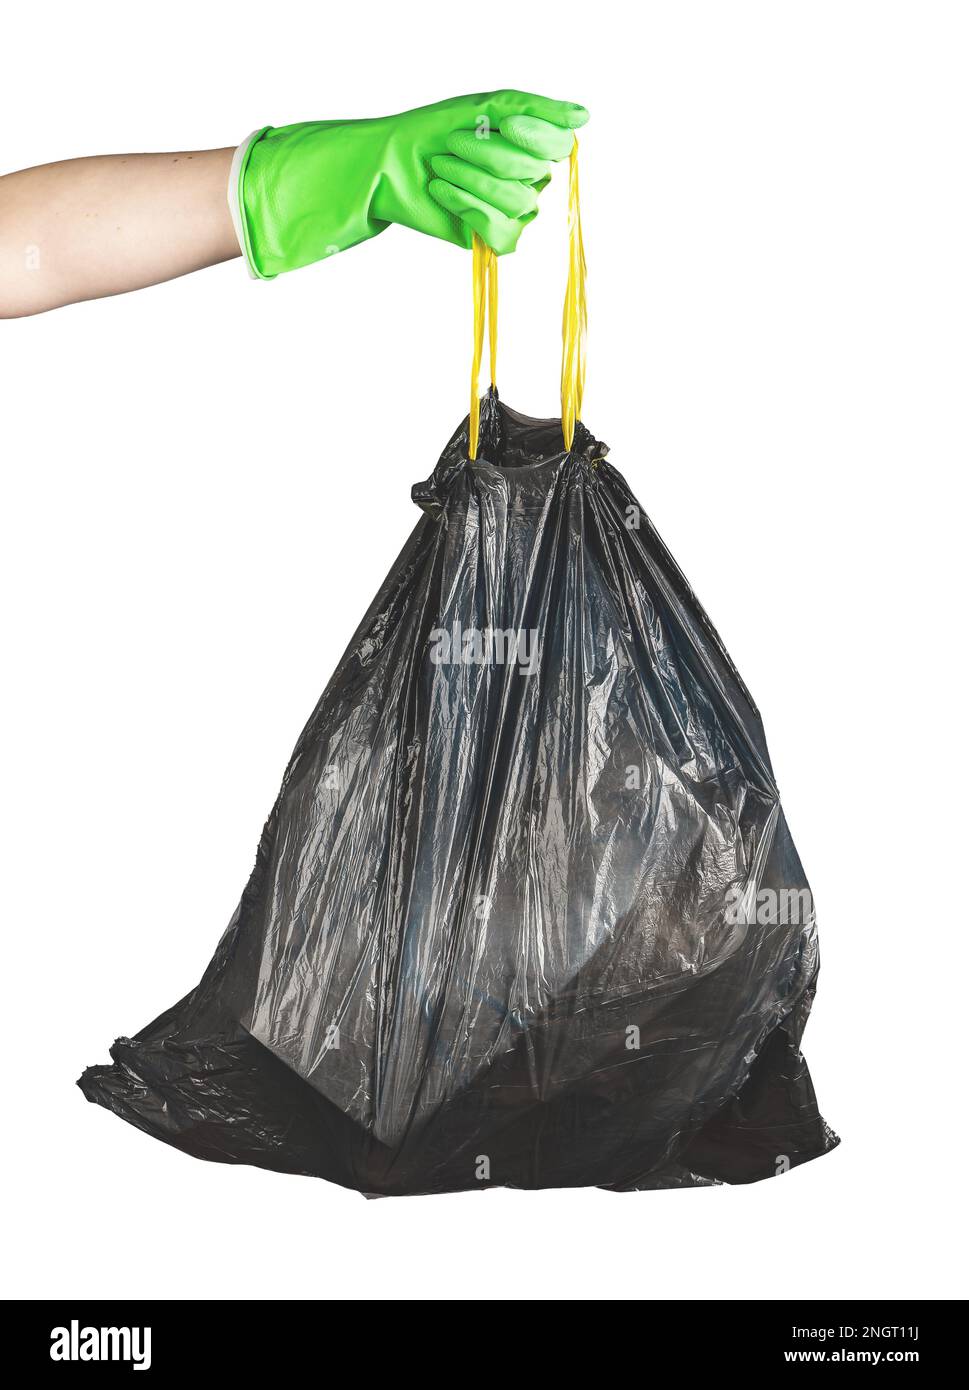 https://c8.alamy.com/comp/2NGT11J/hand-in-glove-holding-handles-of-black-disposable-garbage-bag-trash-sack-full-of-rubbish-isolated-on-white-2NGT11J.jpg